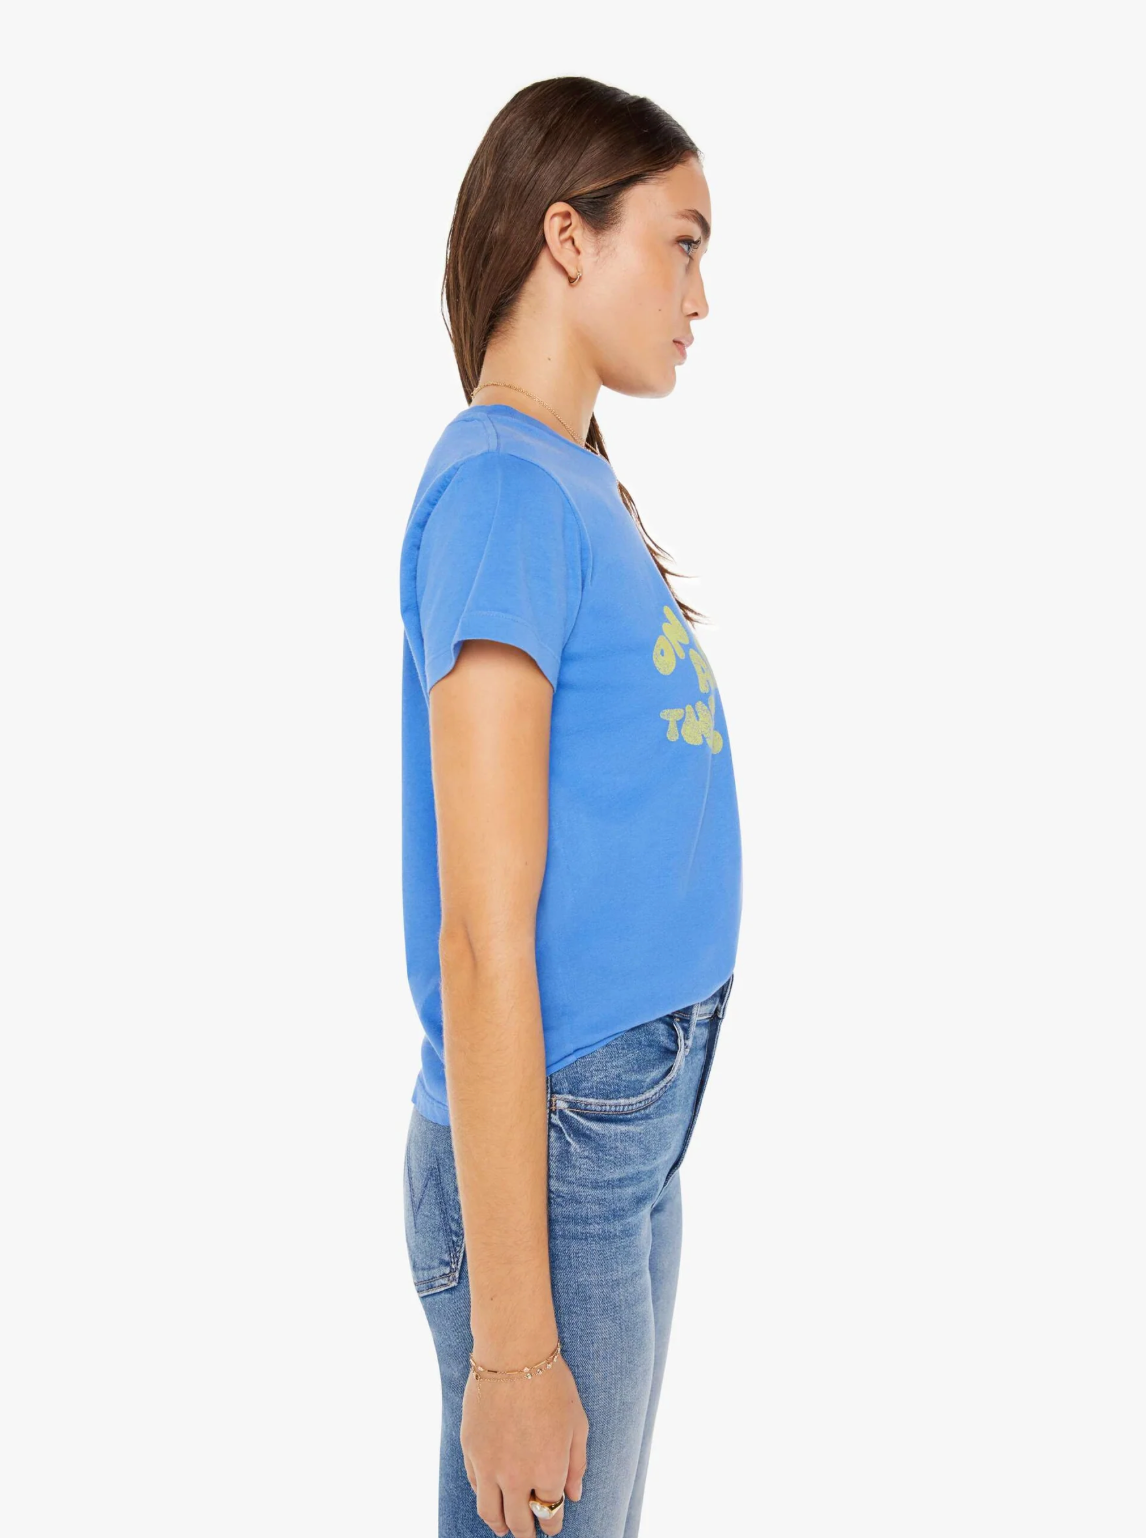 Side profile of a woman wearing The Boxy Goodie Goodie On The Road Again blue t-shirt with text and blue jeans, standing against a white background.